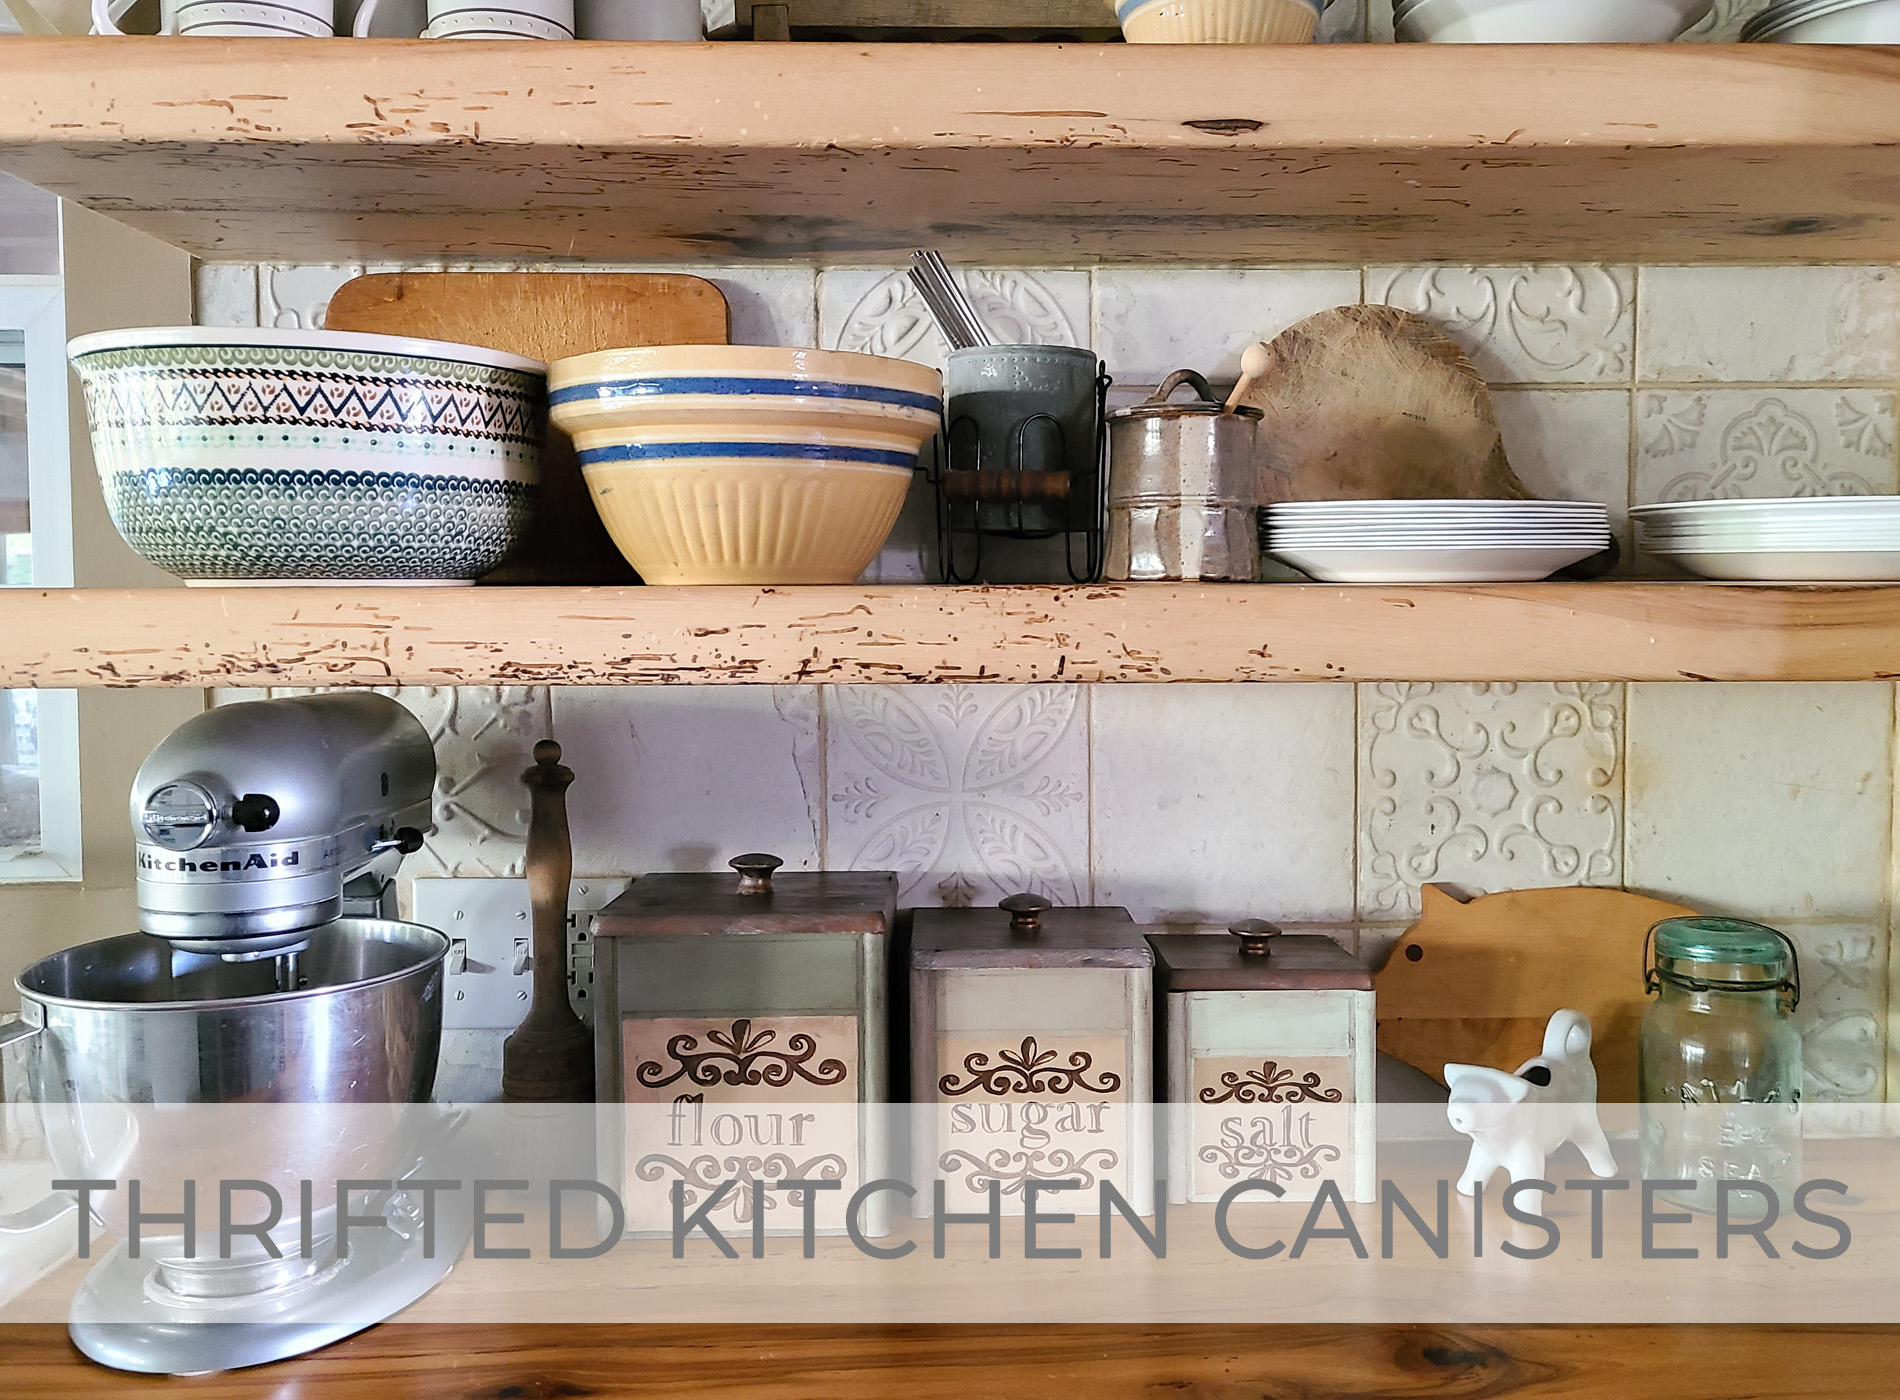 Thrifted Kitchen Canisters Get Makeover by Prodigal Pieces | prodigalpieces.com